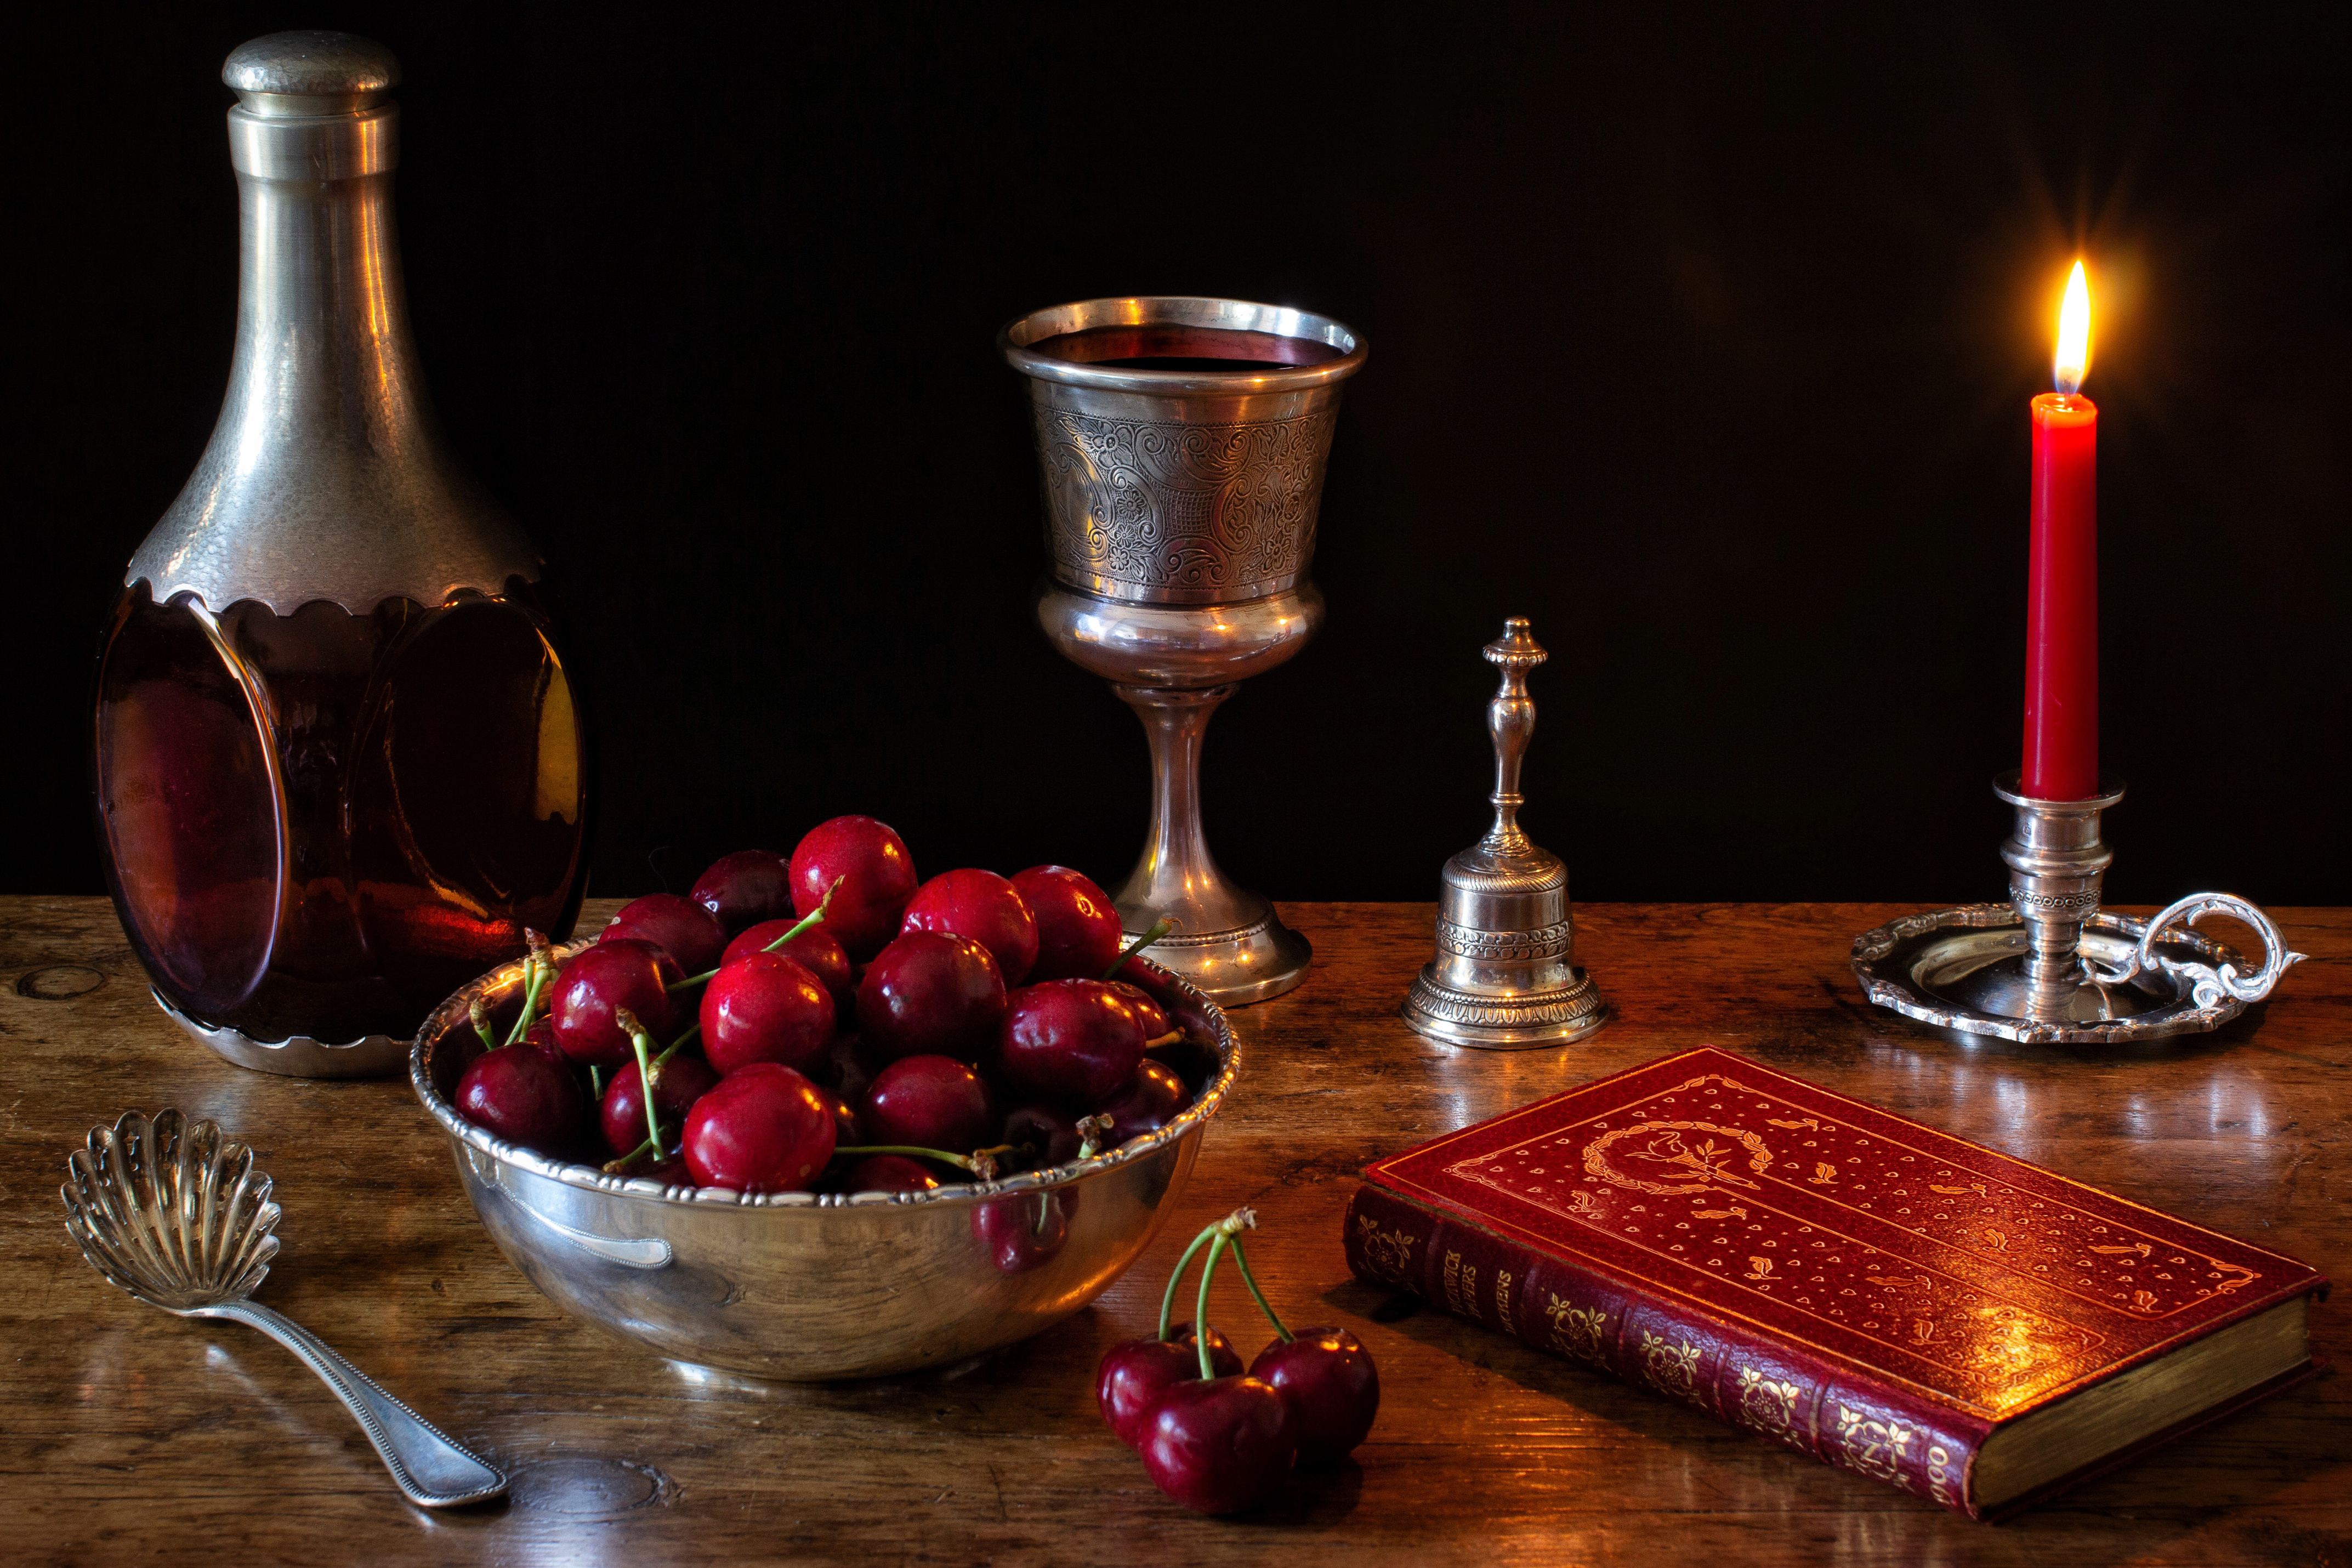 photography, still life, bowl, candle, cherry, goblet, pitcher lock screen backgrounds